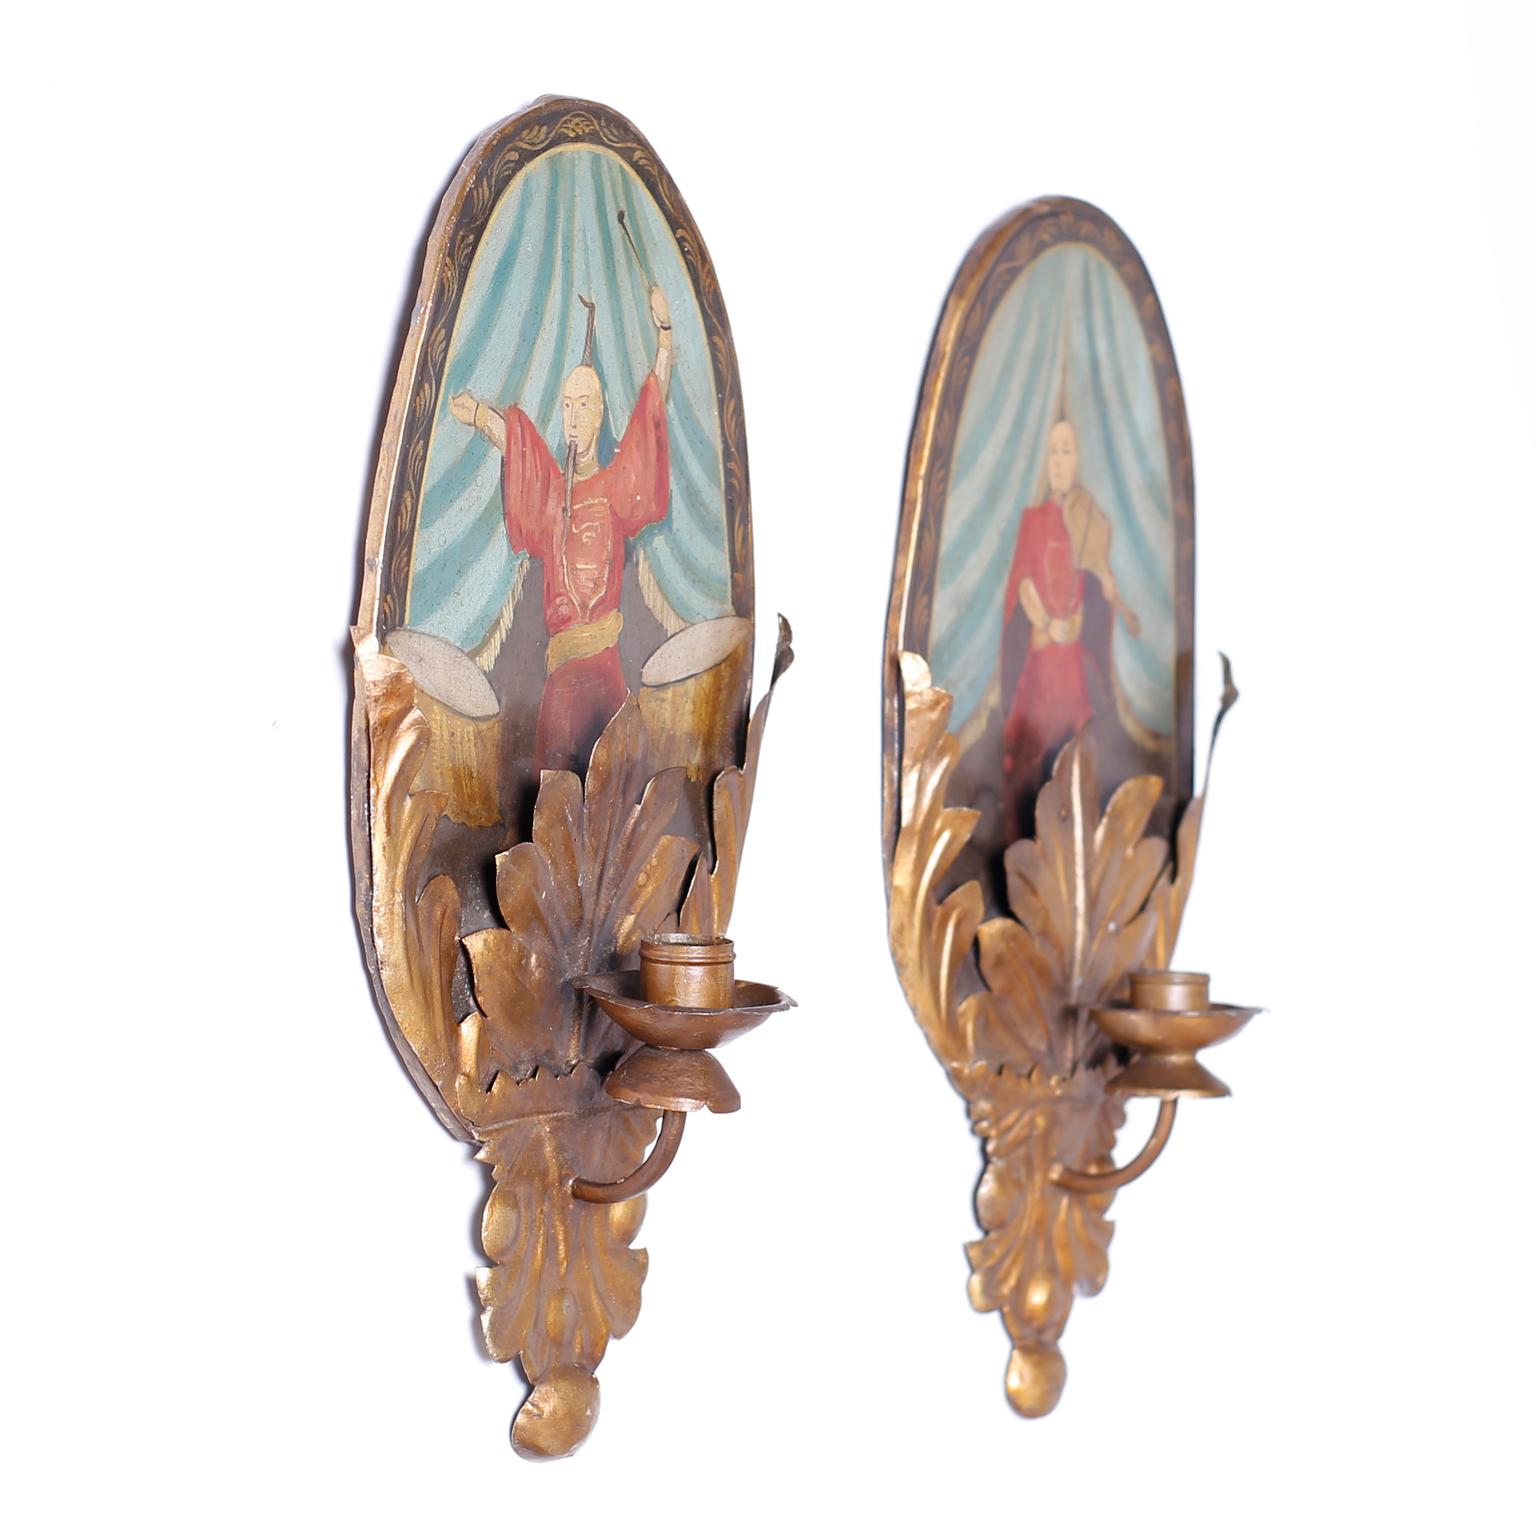 Pair of antique one light wall sconces with hand painted chinoiserie tole plaques over gilt metal acanthus leaves and metal candle cups. An interesting history is revealed on the back of one.